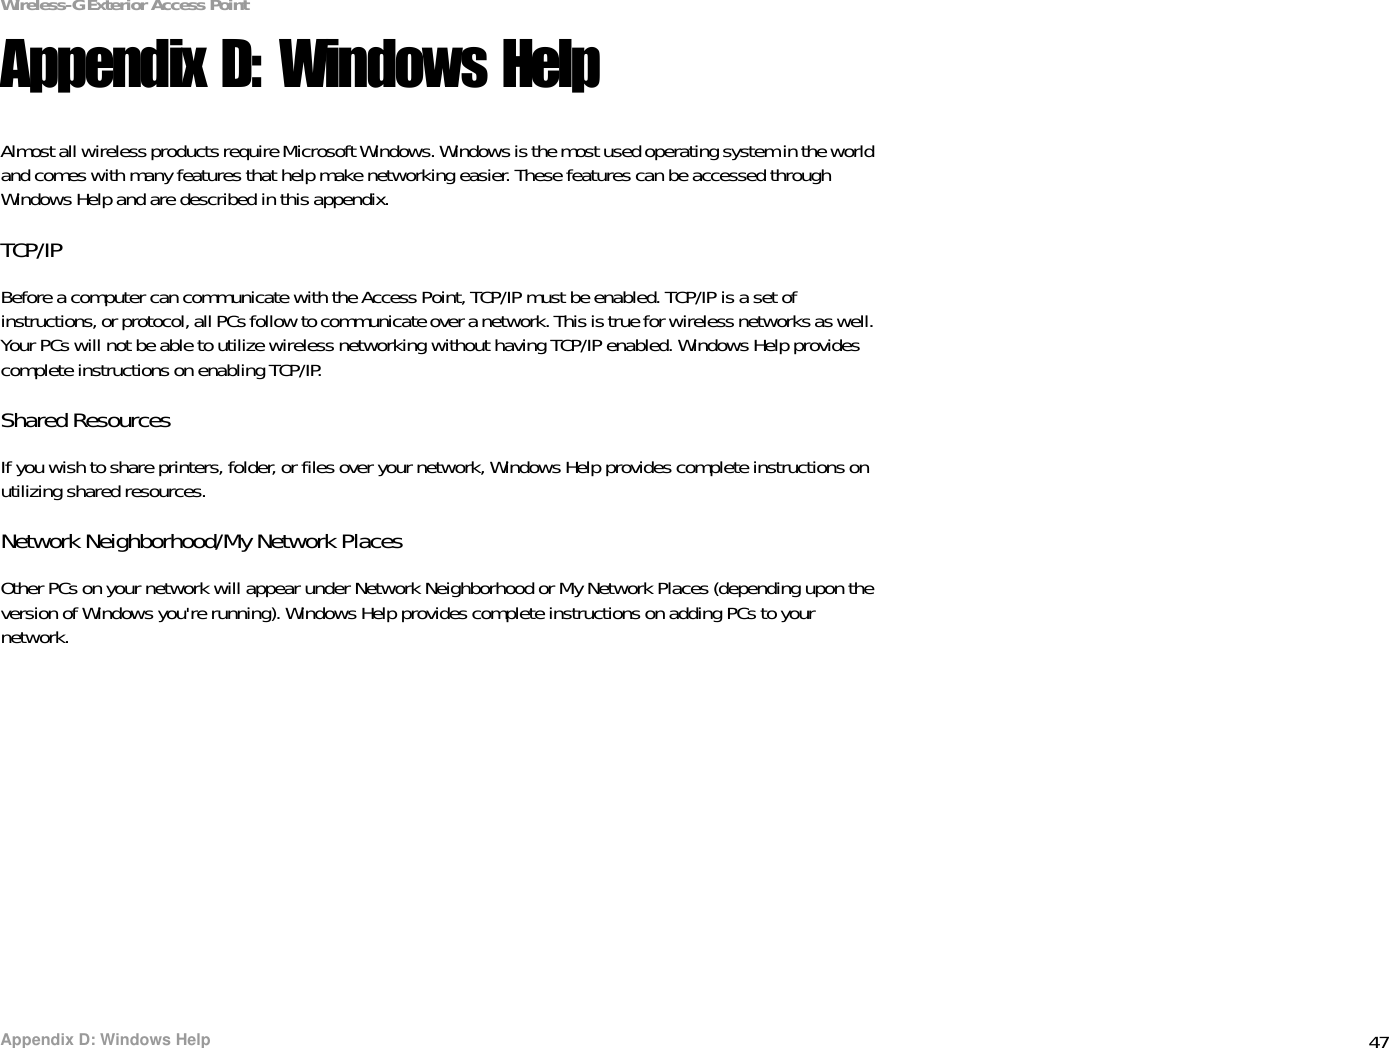 47Appendix D: Windows HelpWireless-G Exterior Access PointAppendix D: Windows HelpAlmost all wireless products require Microsoft Windows. Windows is the most used operating system in the world and comes with many features that help make networking easier. These features can be accessed through Windows Help and are described in this appendix.TCP/IPBefore a computer can communicate with the Access Point, TCP/IP must be enabled. TCP/IP is a set of instructions, or protocol, all PCs follow to communicate over a network. This is true for wireless networks as well. Your PCs will not be able to utilize wireless networking without having TCP/IP enabled. Windows Help provides complete instructions on enabling TCP/IP.Shared ResourcesIf you wish to share printers, folder, or files over your network, Windows Help provides complete instructions on utilizing shared resources.Network Neighborhood/My Network PlacesOther PCs on your network will appear under Network Neighborhood or My Network Places (depending upon the version of Windows you&apos;re running). Windows Help provides complete instructions on adding PCs to your network.